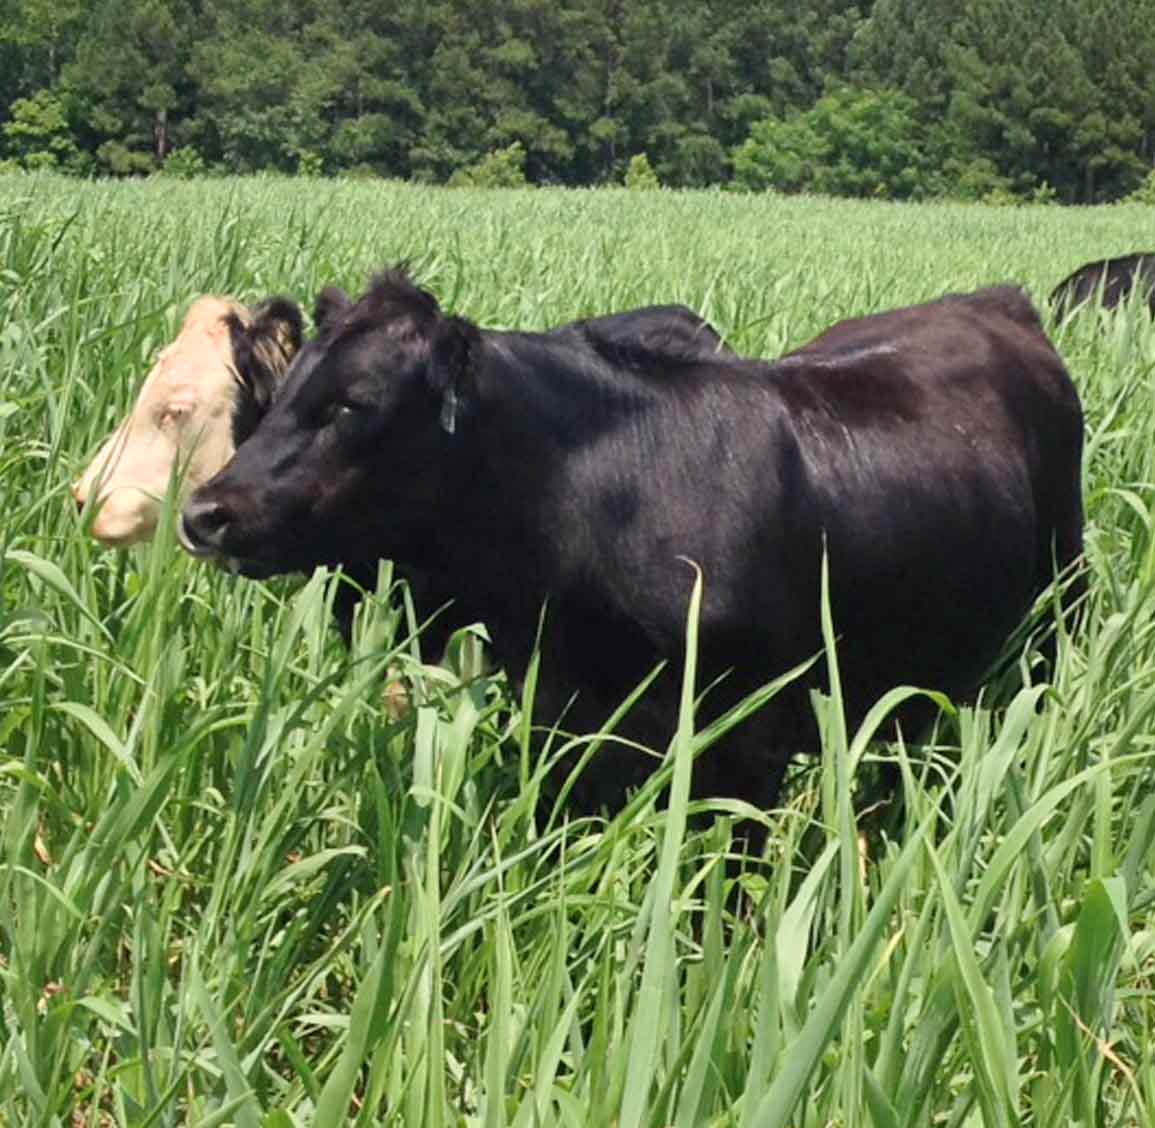 Two steers graze on sorghum/sudangrass hybrid forage at the UGA Eatonton Beef Research Unit as part of a 2014 study on grass-finished beef forages.